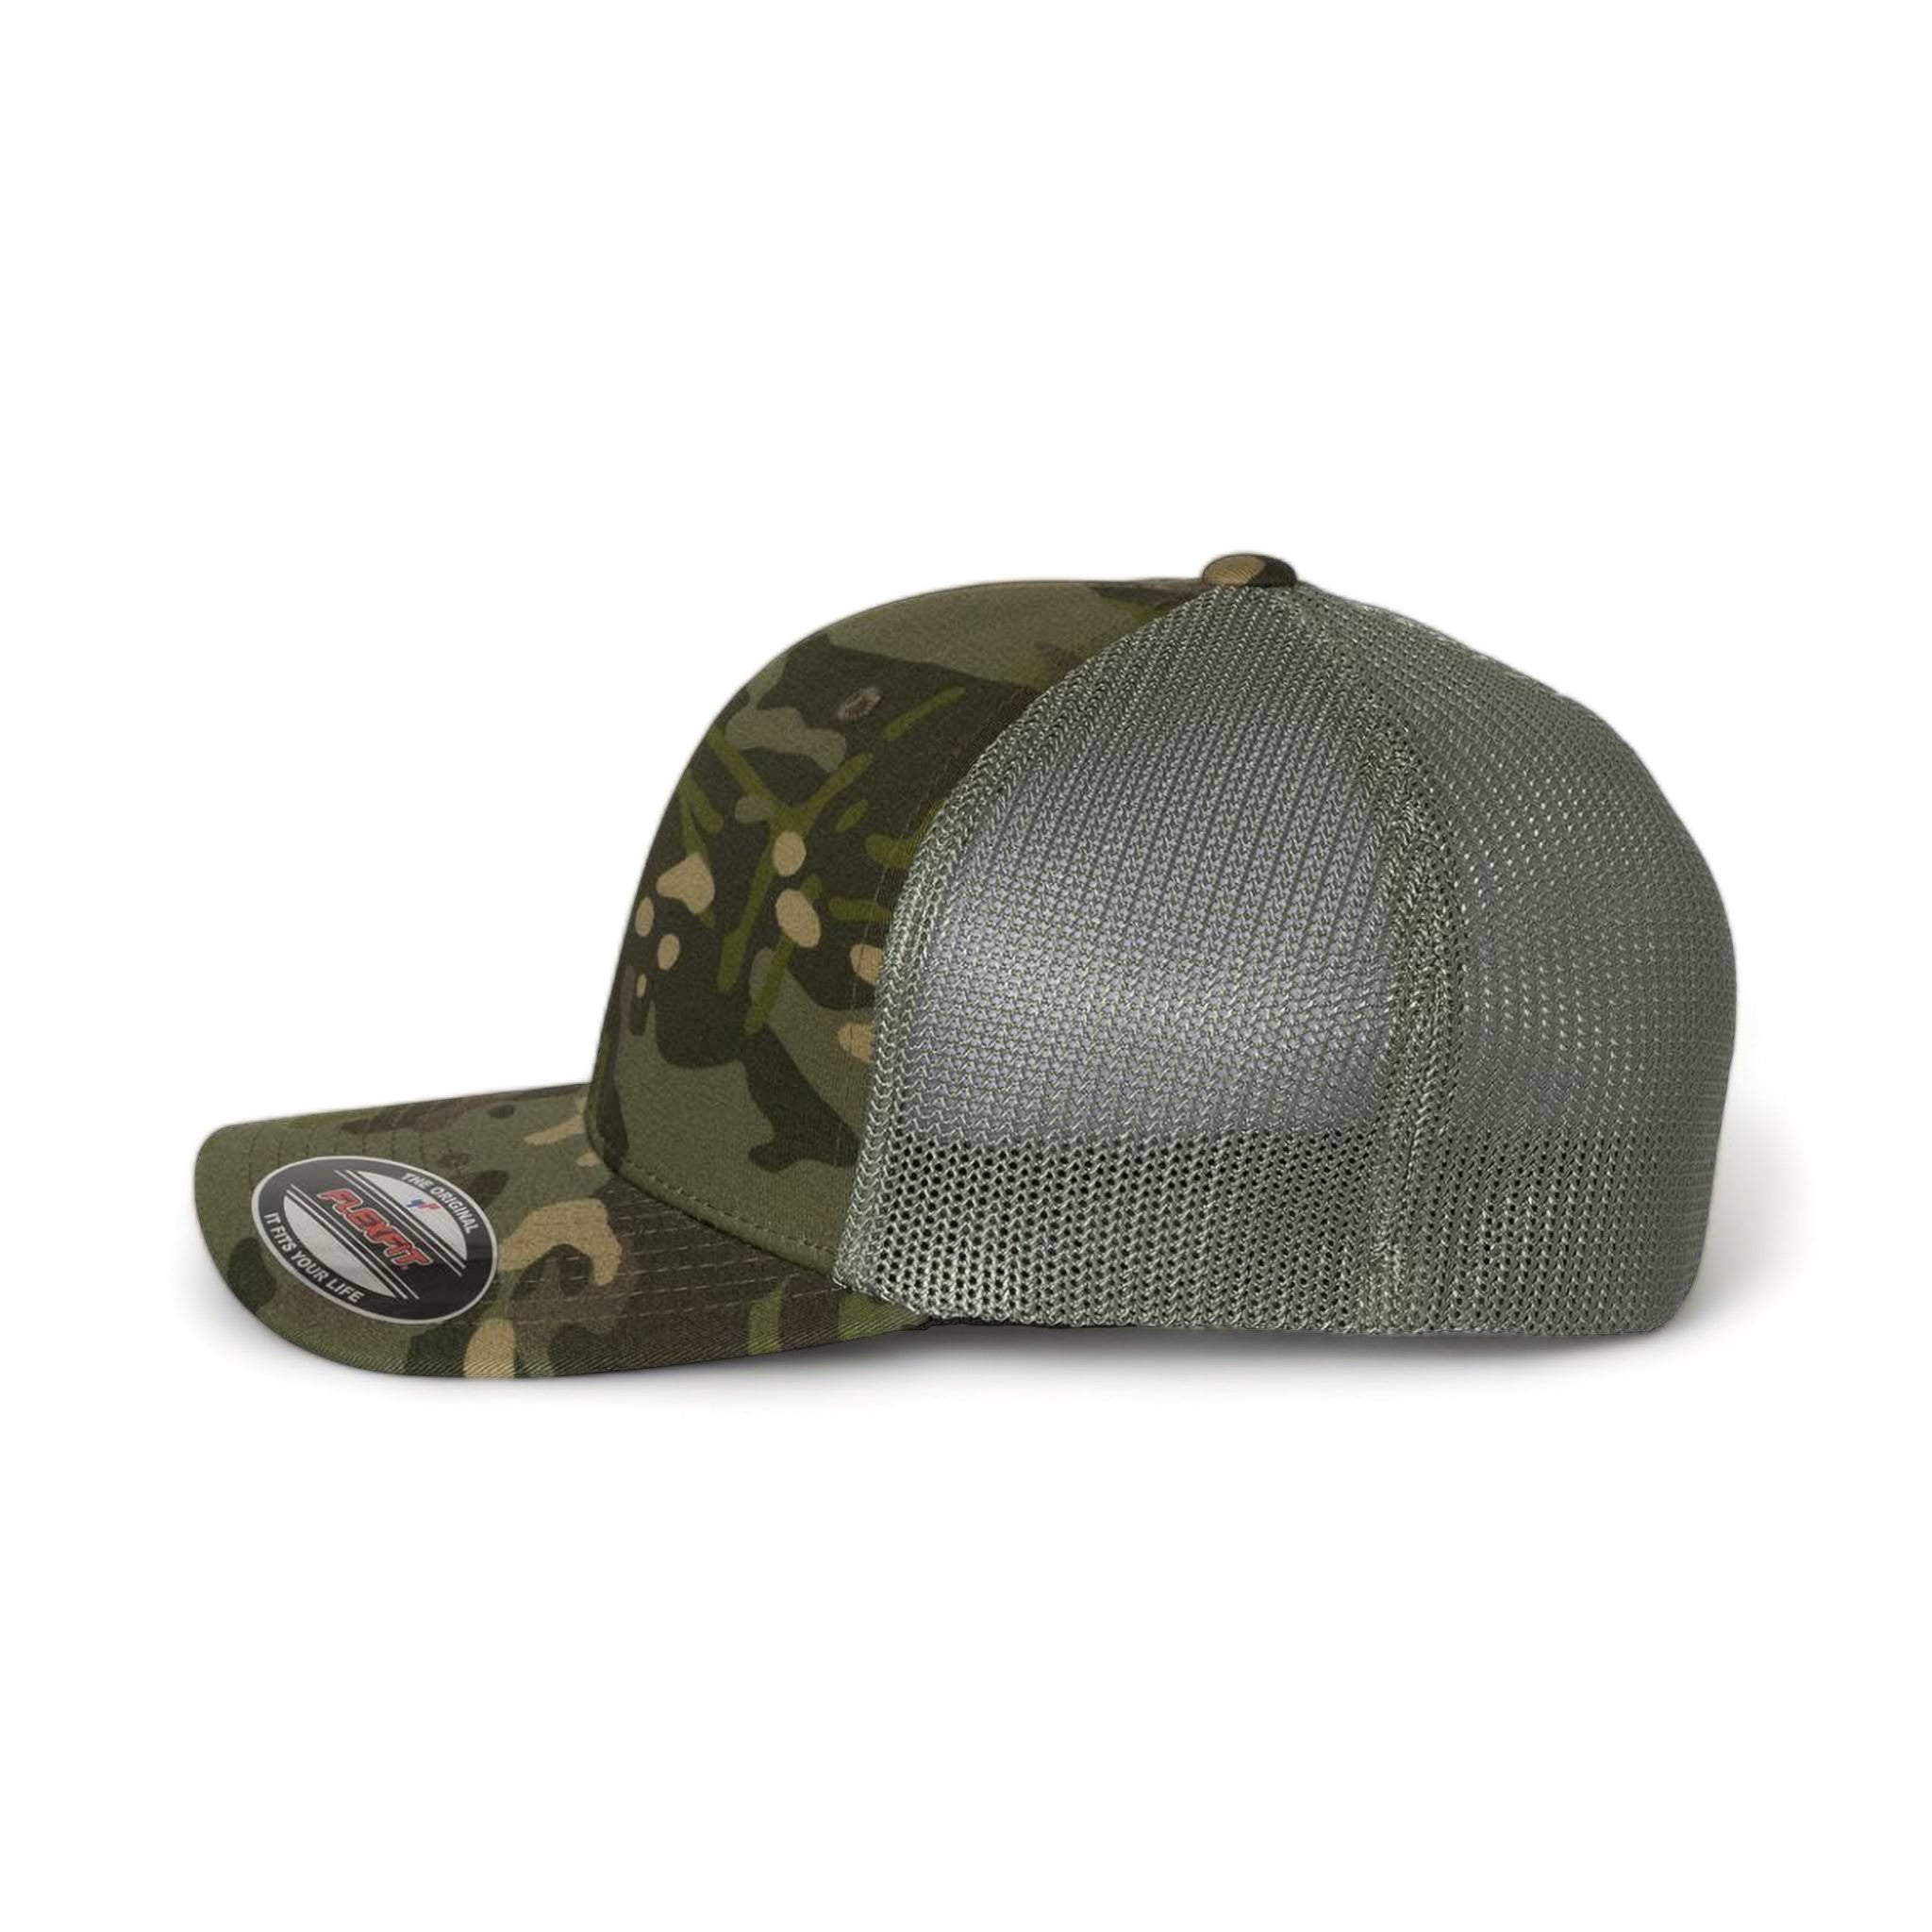 Side view of Flexfit 6511 custom hat in multicam tropic and green